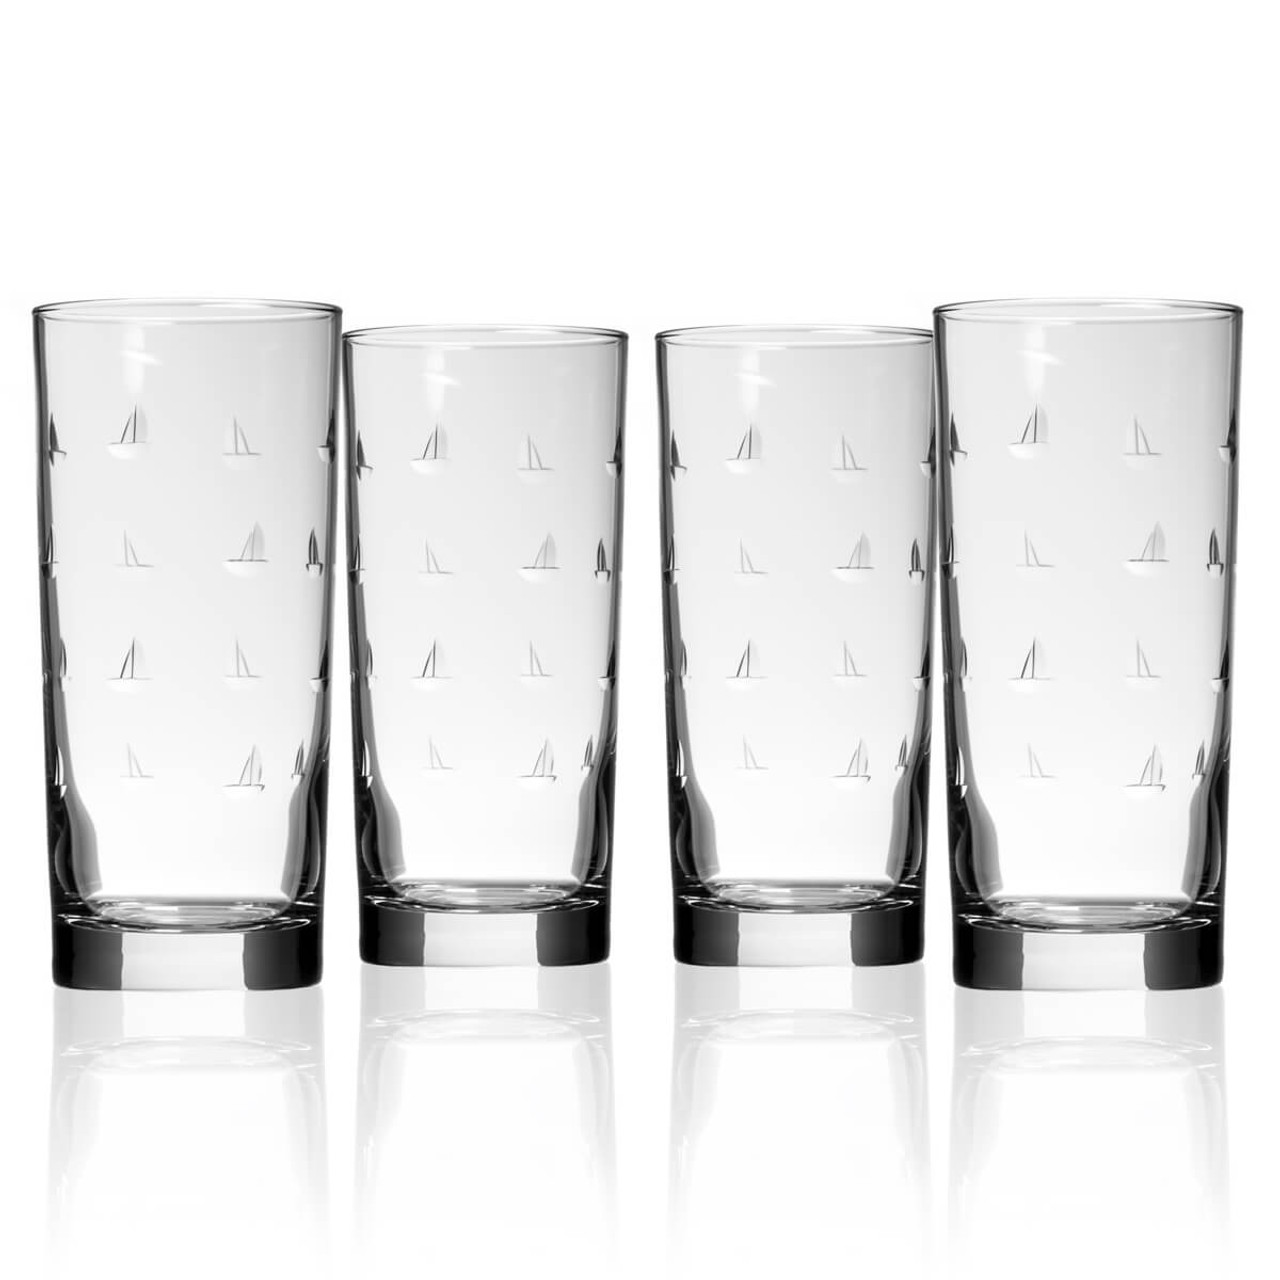 Sailing Highball Glasses - Set of 4 by ROLF glass